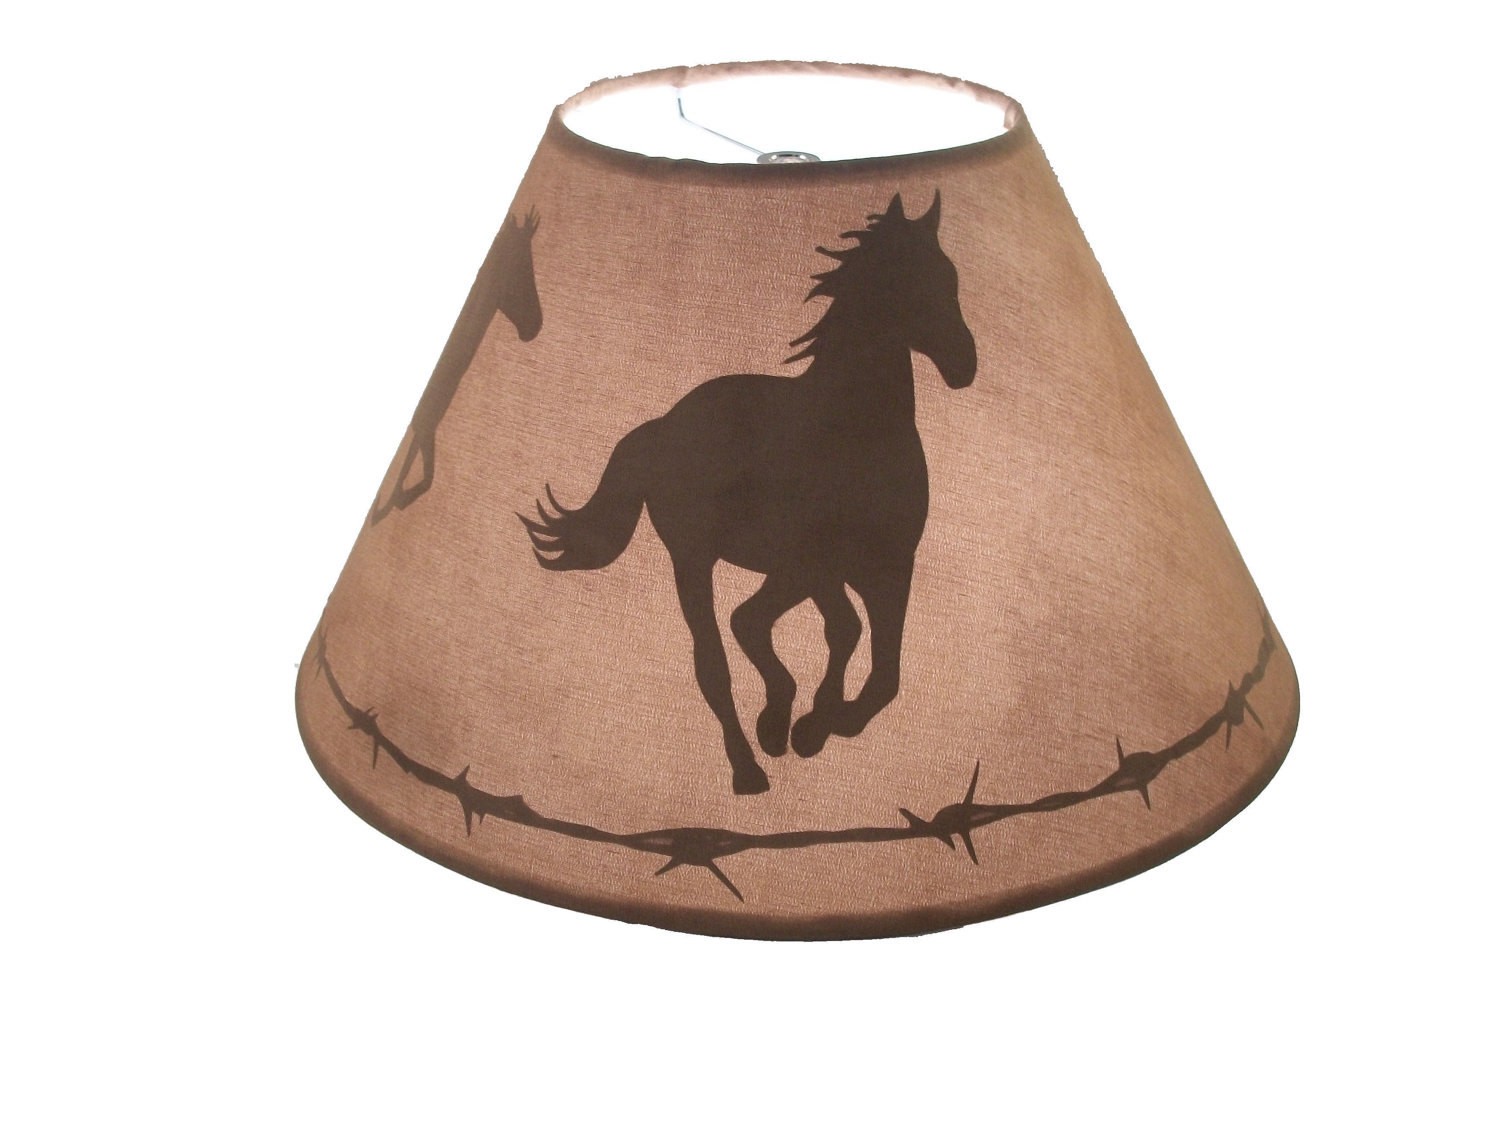 Western lamp shade with a silhouette of